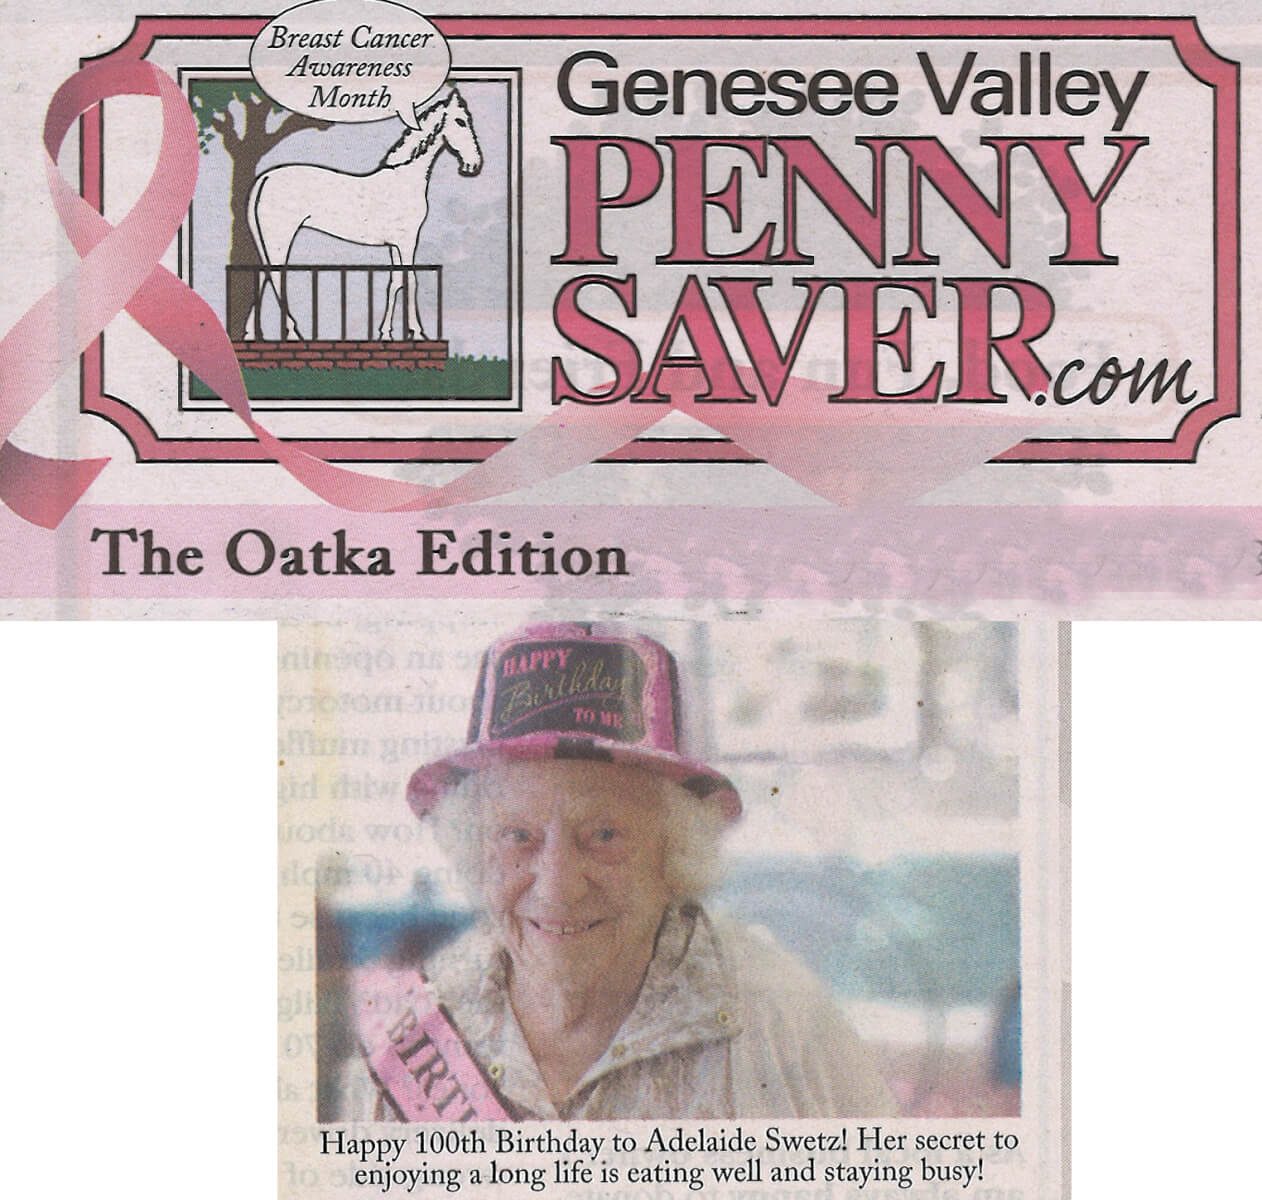 Westwood Commons resident Addie Swetz turns 100 photo in the Genesee Valley Penny Saver October 2016